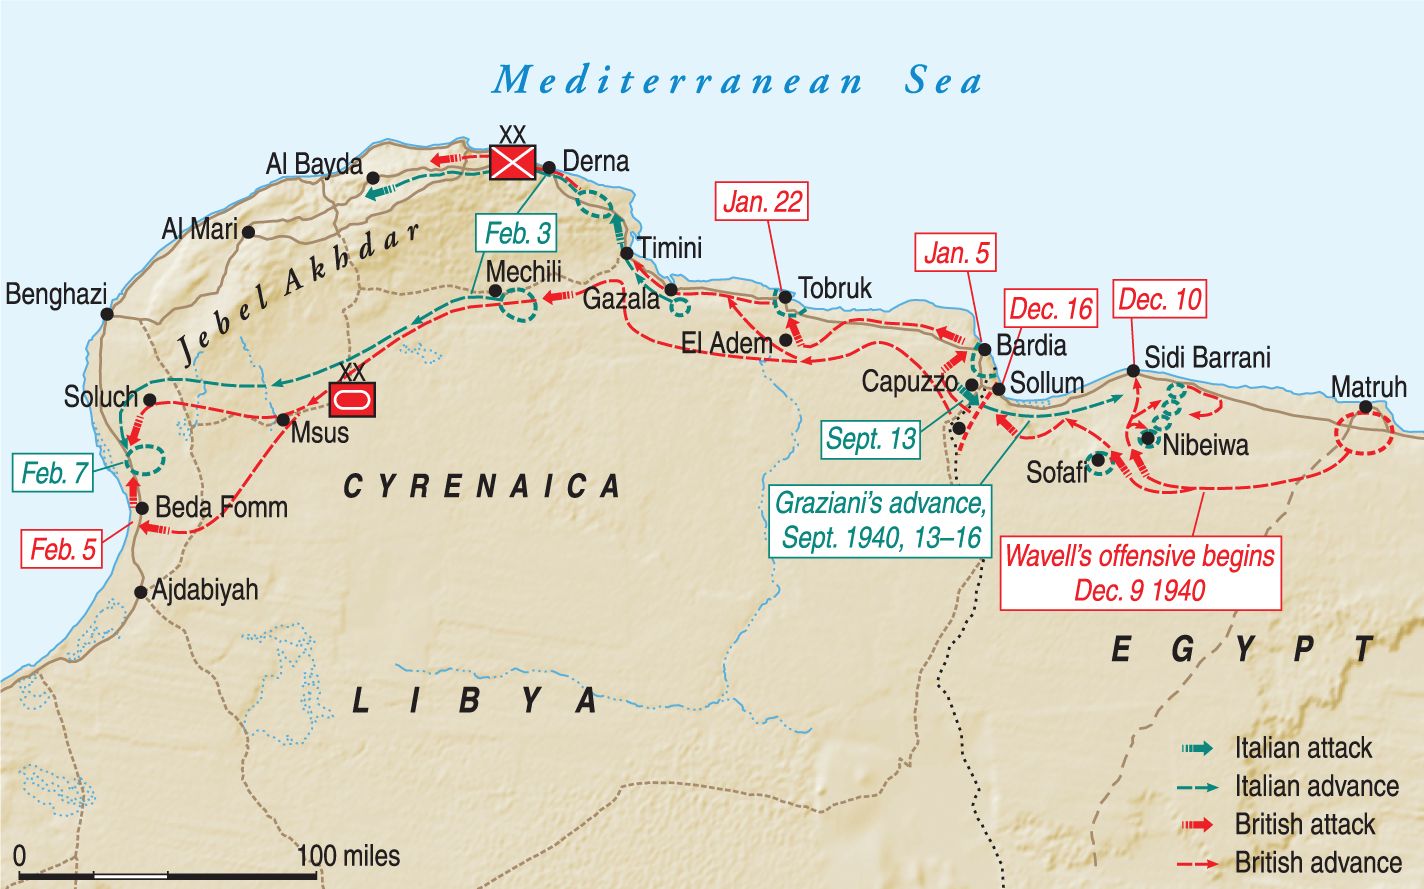 According to many military historians, the British advance westward against the Italians in North Africa was stopped only by the diversion of men and war matériel to Greece. Lieutenant General Richard O'Connor, who led the immensely successful Operation Compass, pleaded to no avail for the resources to continue the advance to the Libyan capital of Tripoli.